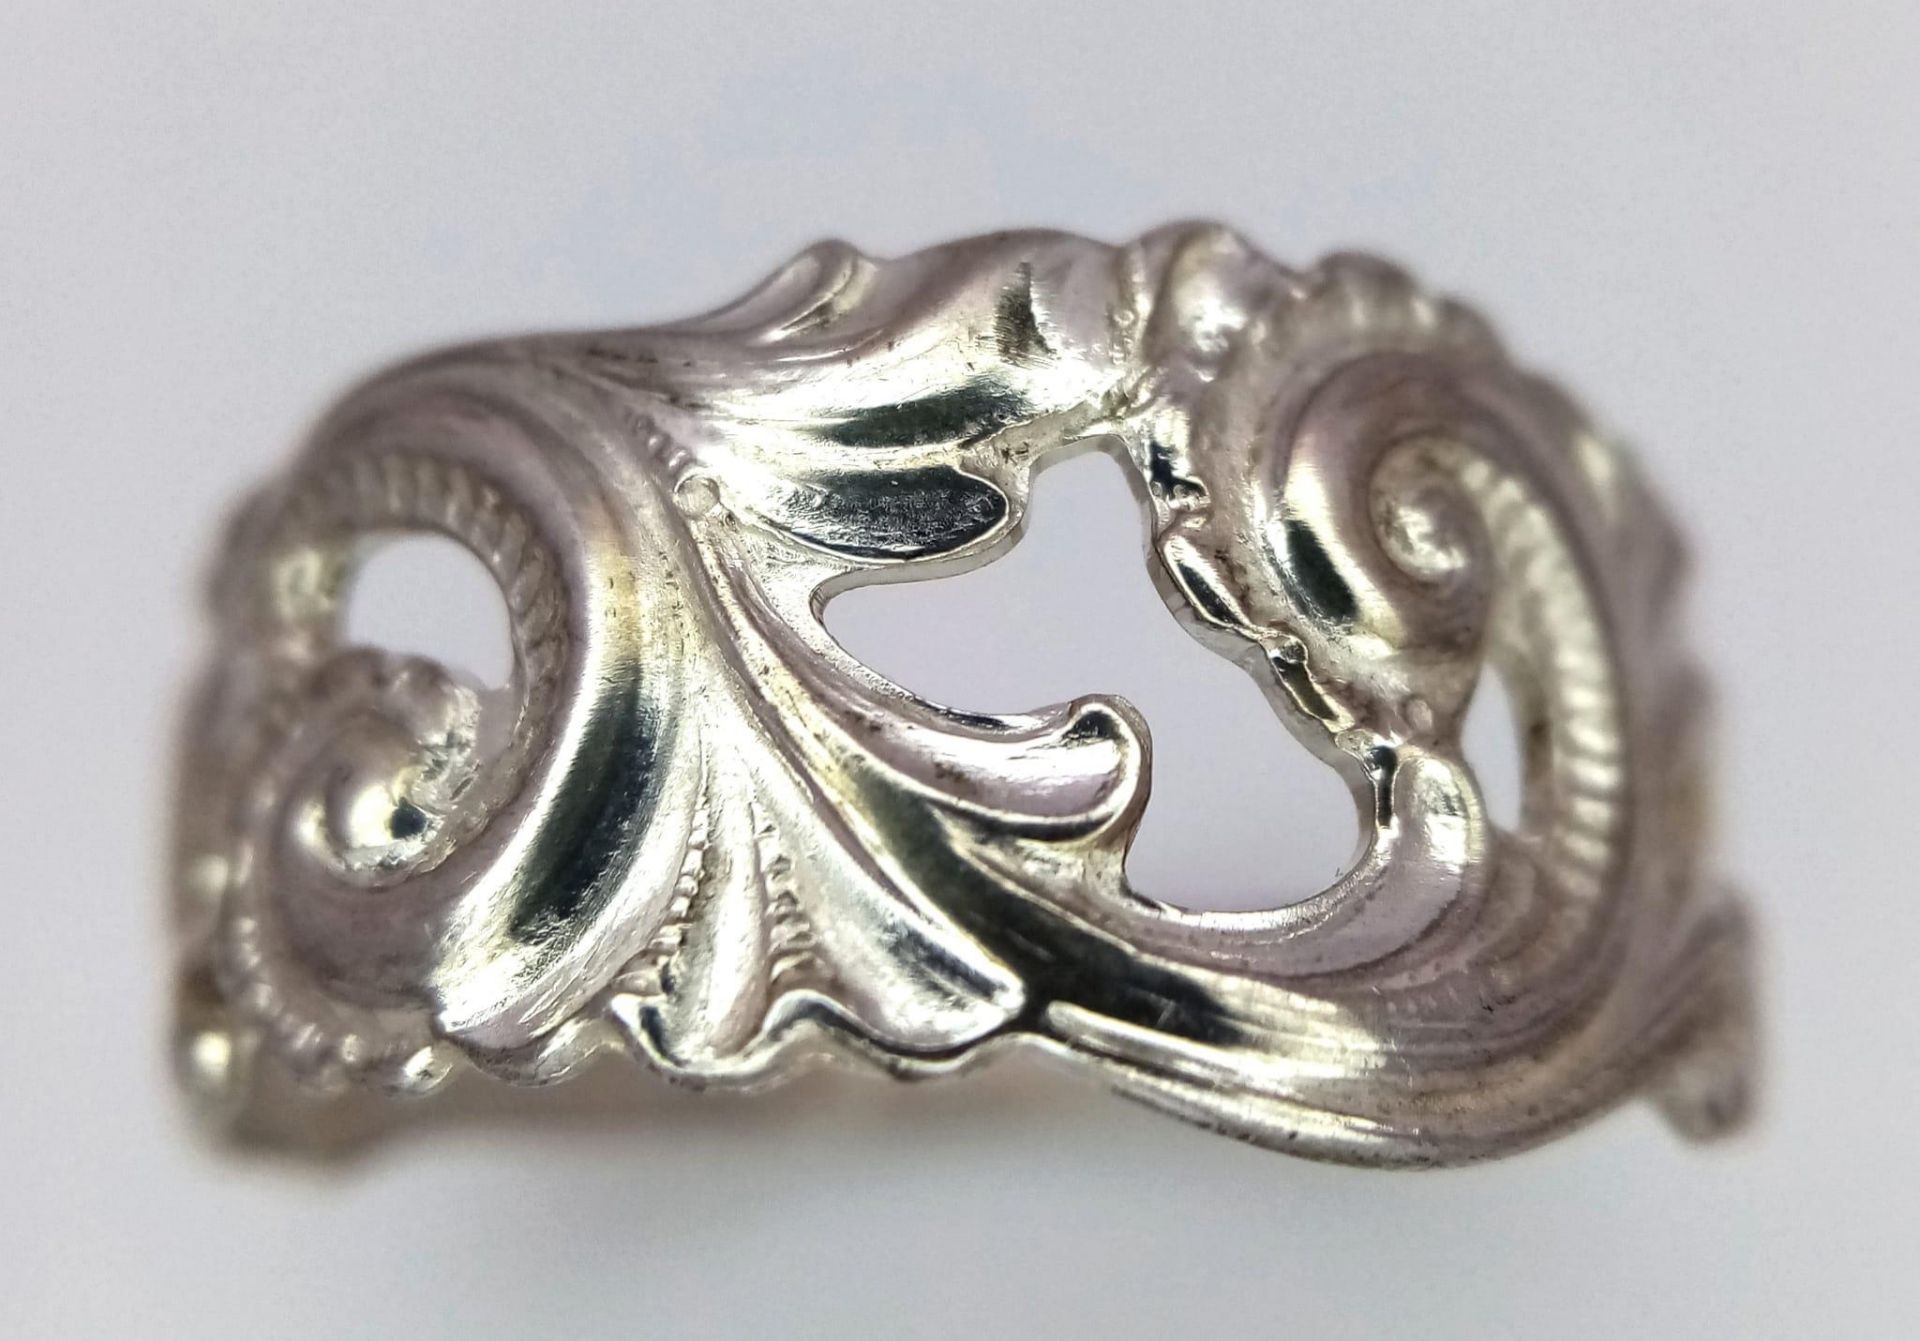 A STERLING SILVER RECYCYLED SPOON HANDLE RING. 4.2G SIZE Z. HAND CRAFTED BY ADAM - Image 2 of 4